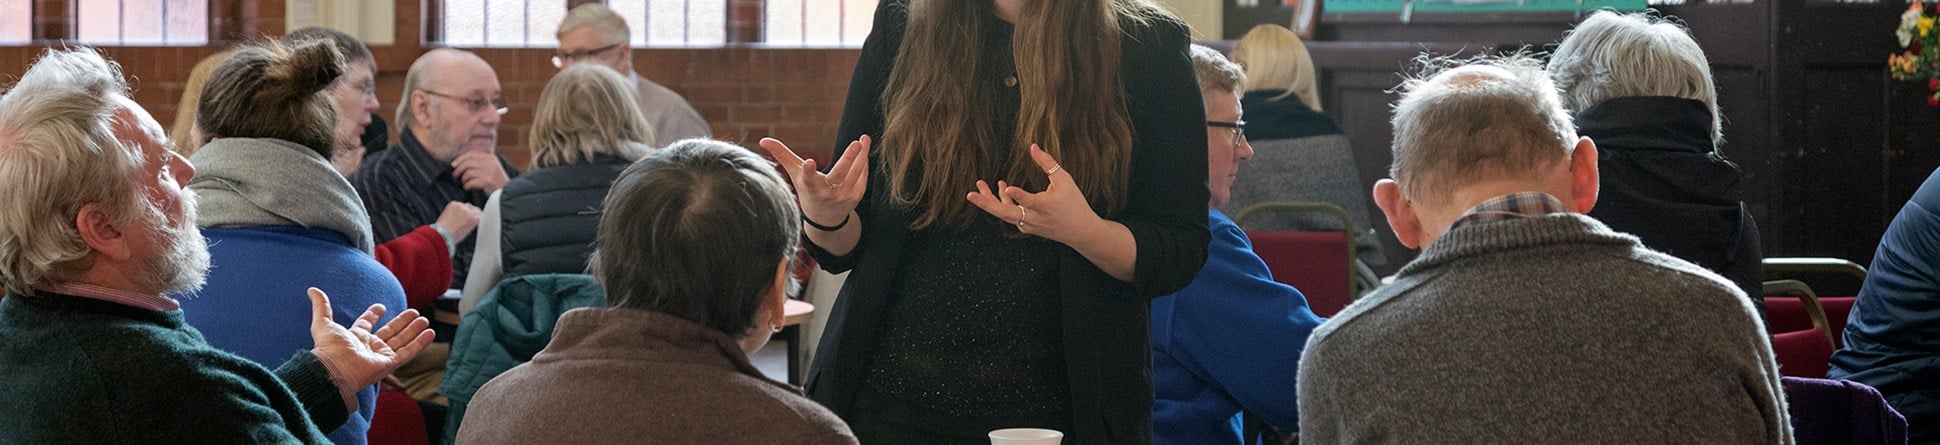 A person with long brown hair stands and gestures while speaking to seated elderly people in a community hall with tea and coffee cups.